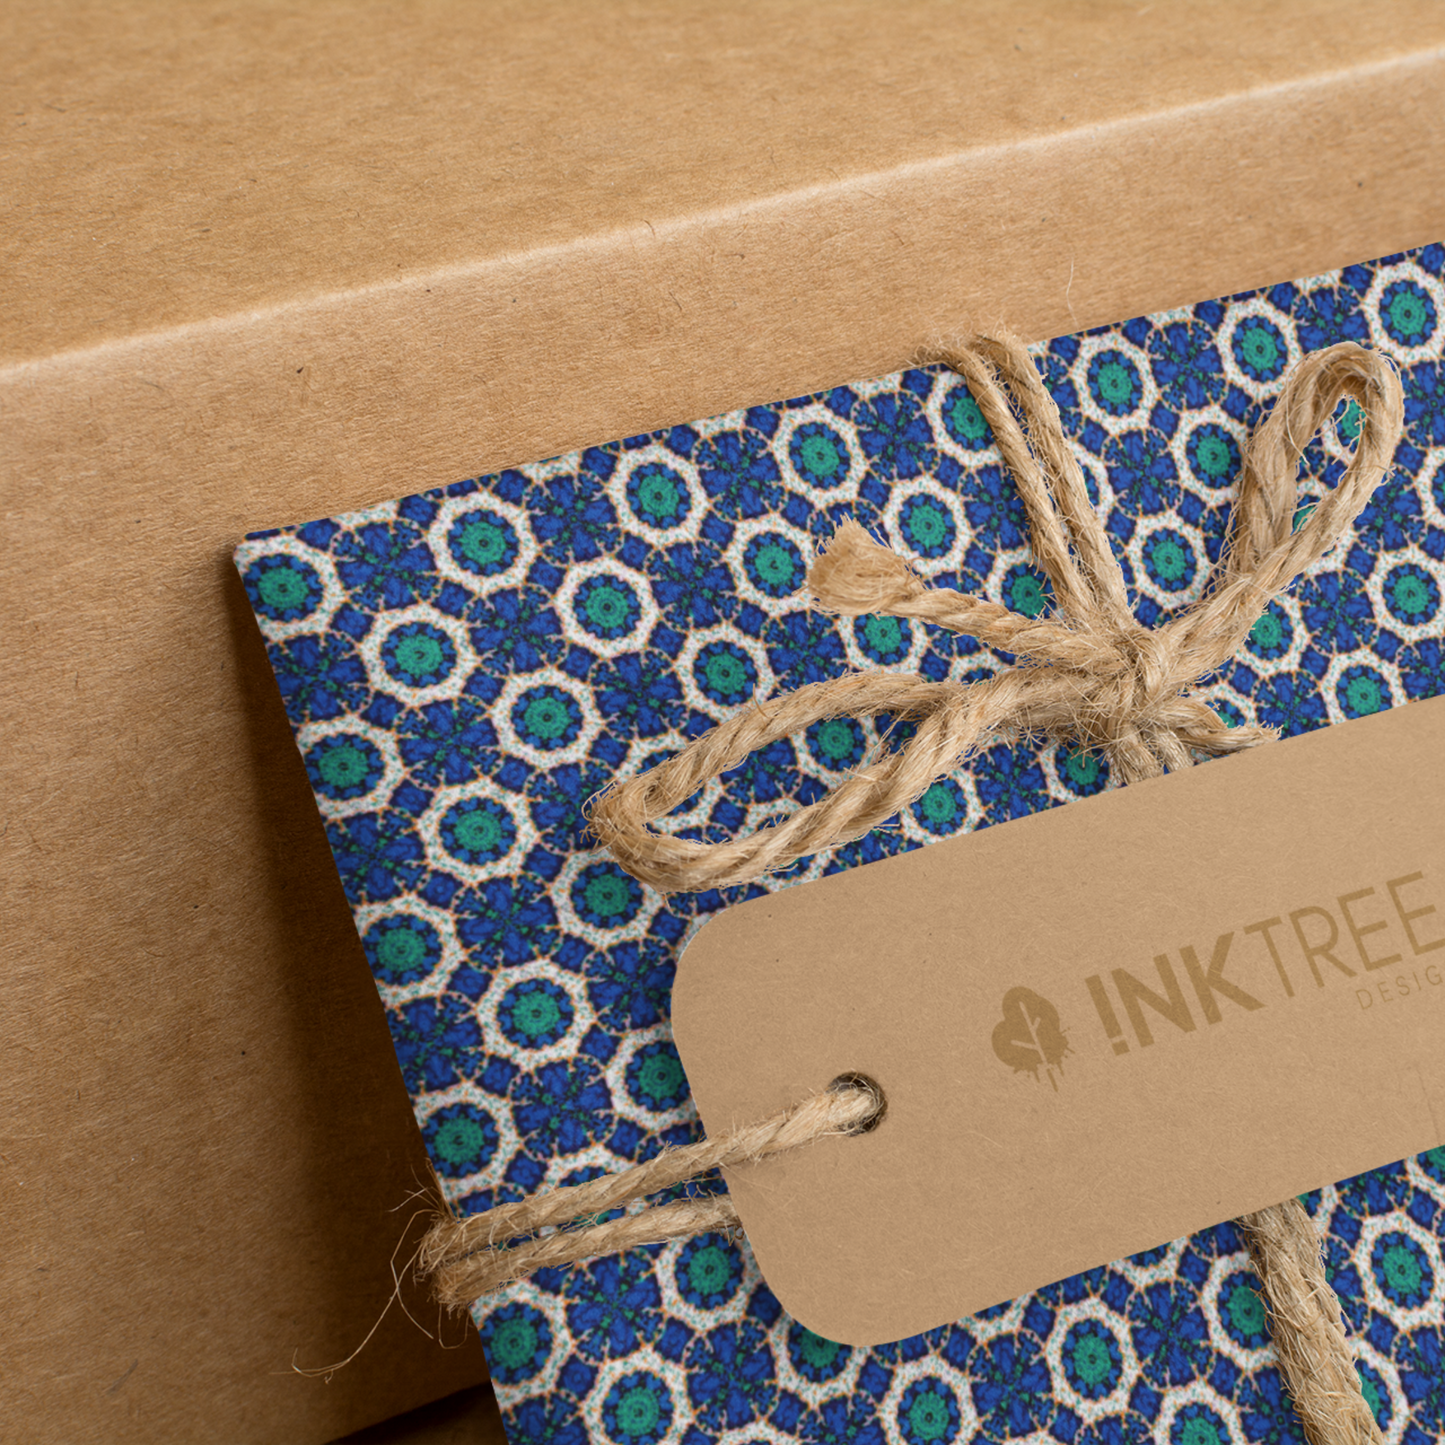 A present wrapped with an orange, white, black, blue and green floral pattern, tied with brown string with a brown paper tag with ink tree design logo on it, leaning on a brown paper background.